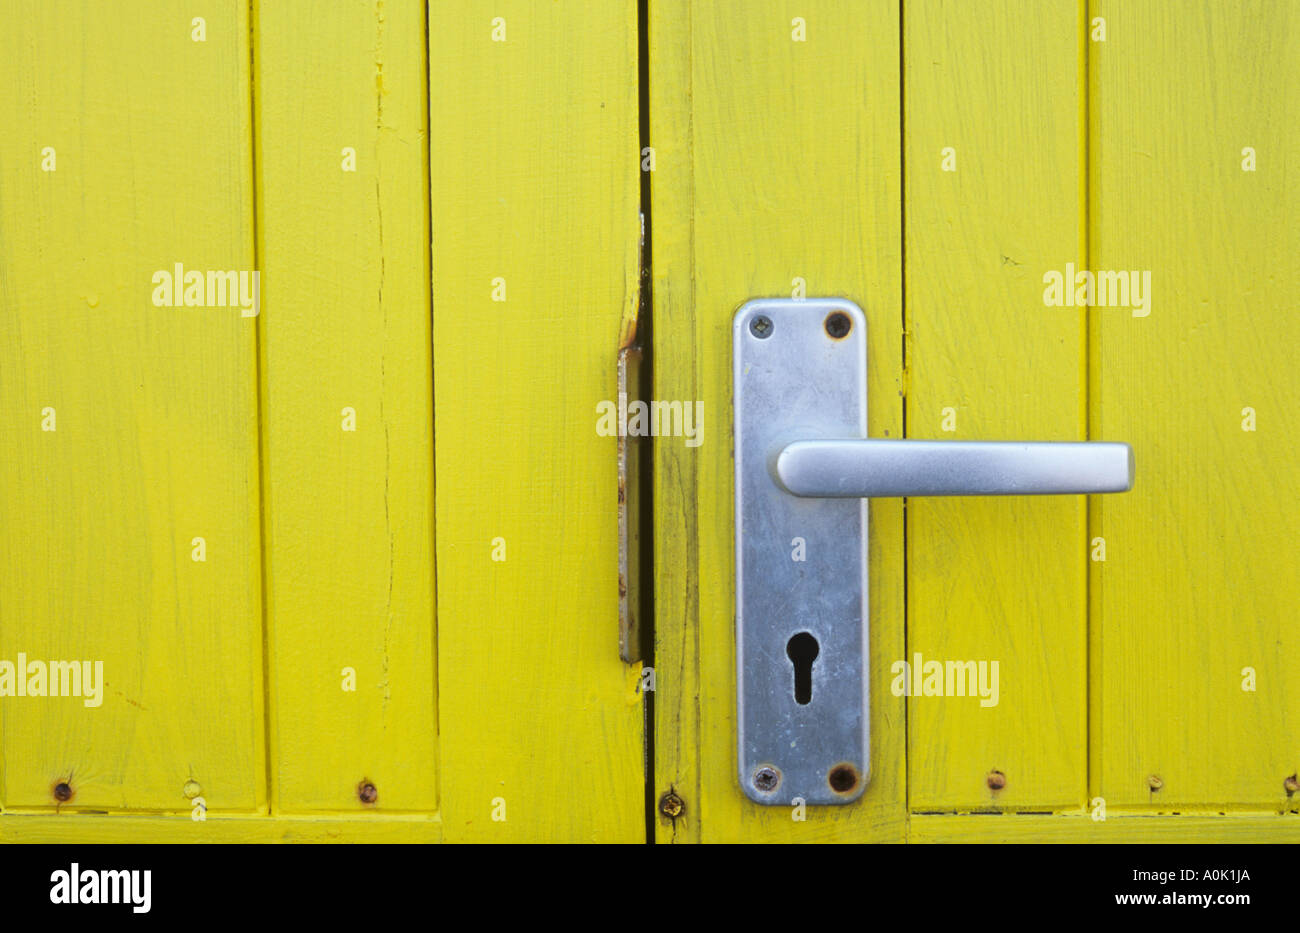 Close up detail of bright yellow stained wooden door on a hut or shed or kiosk or booth with aluminium door handle Stock Photo